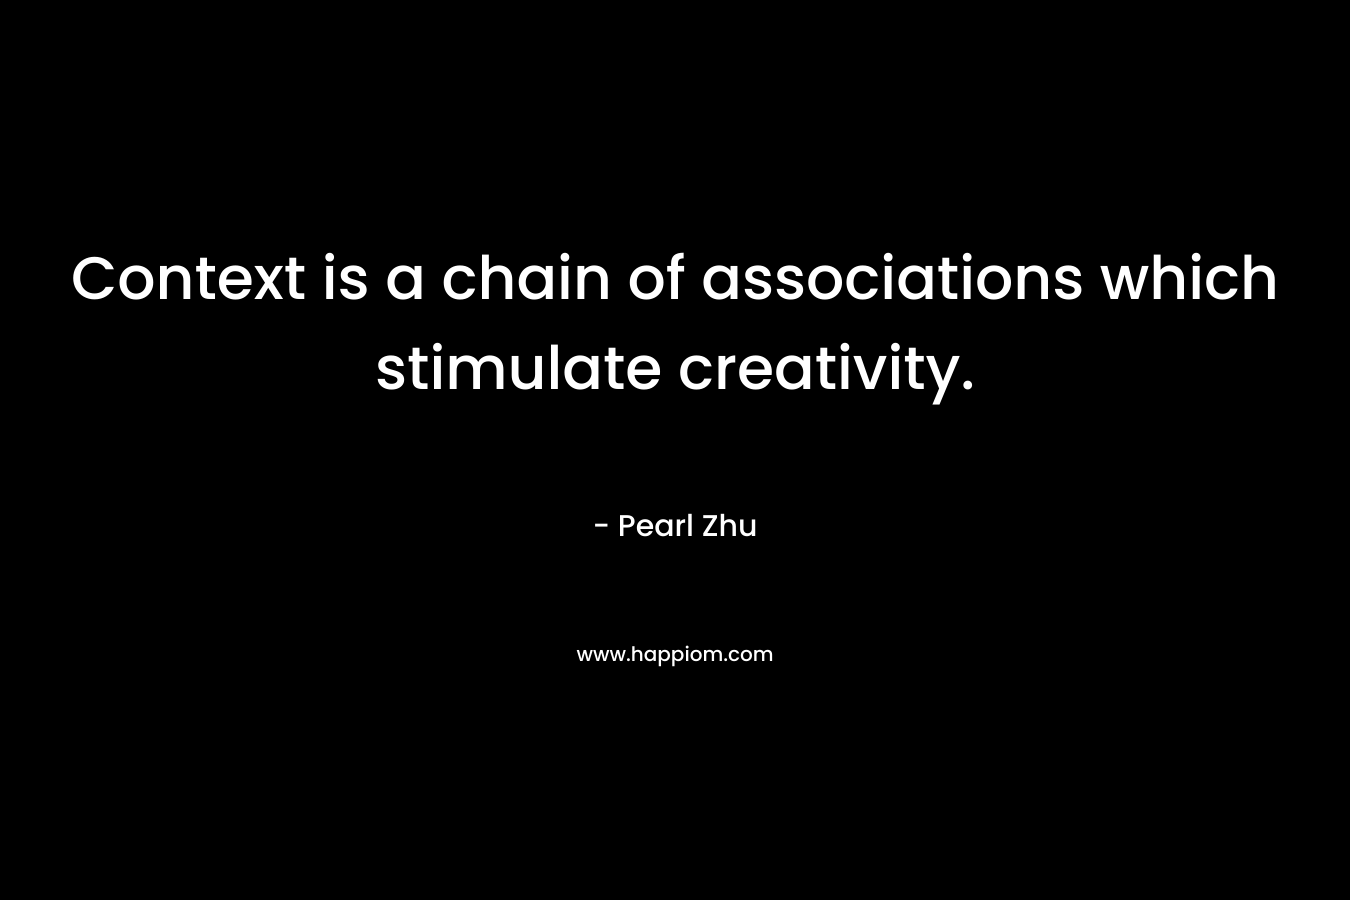 Context is a chain of associations which stimulate creativity. – Pearl Zhu